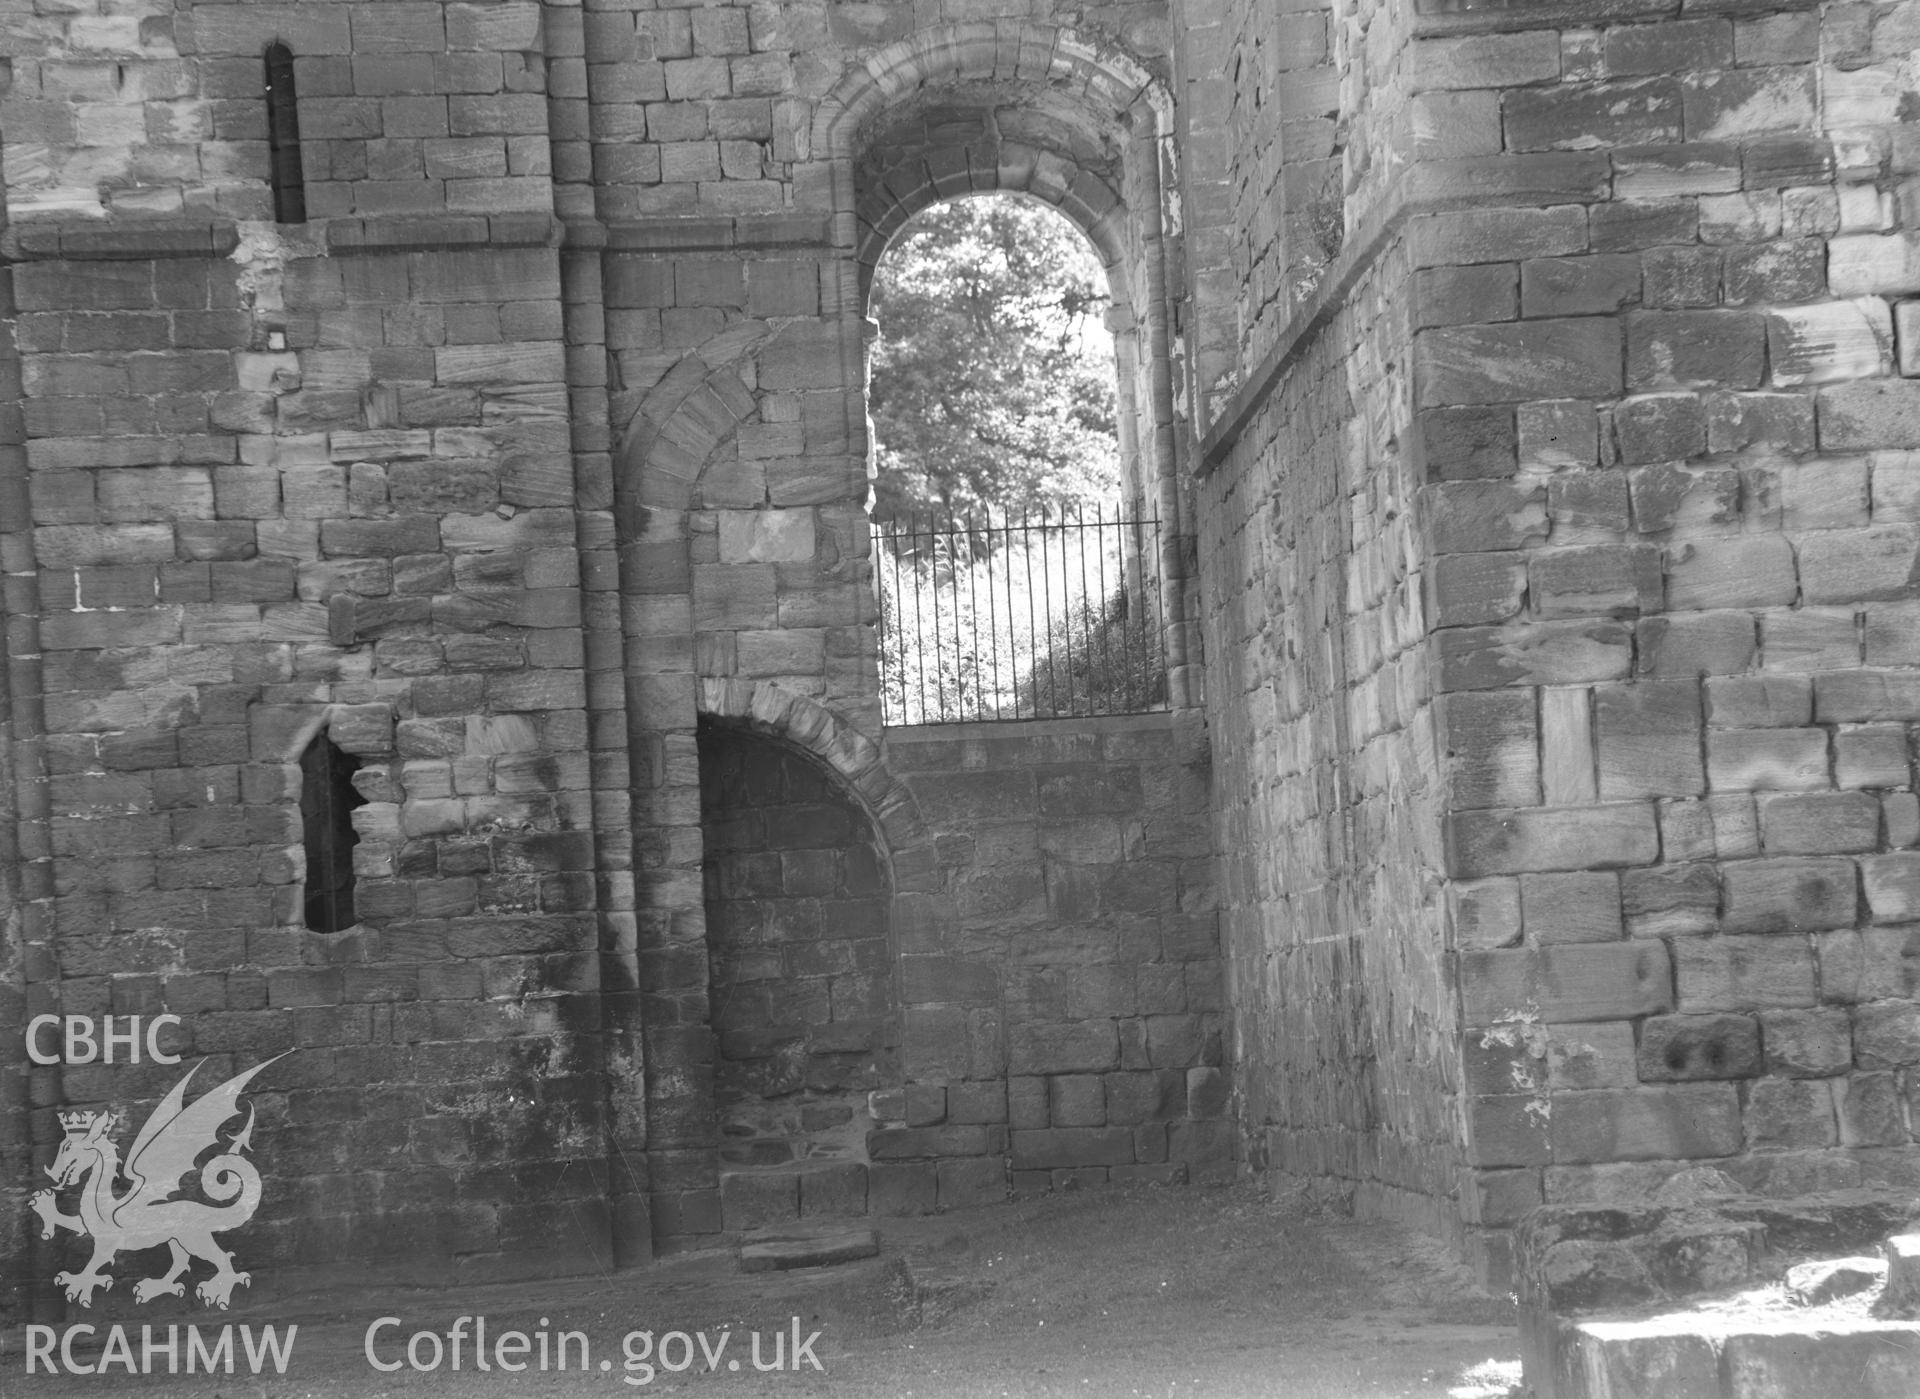 Digital copy of a black and white nitrate negative showing interior view of St. David's Cathedral, taken by E.W. Lovegrove, July 1936